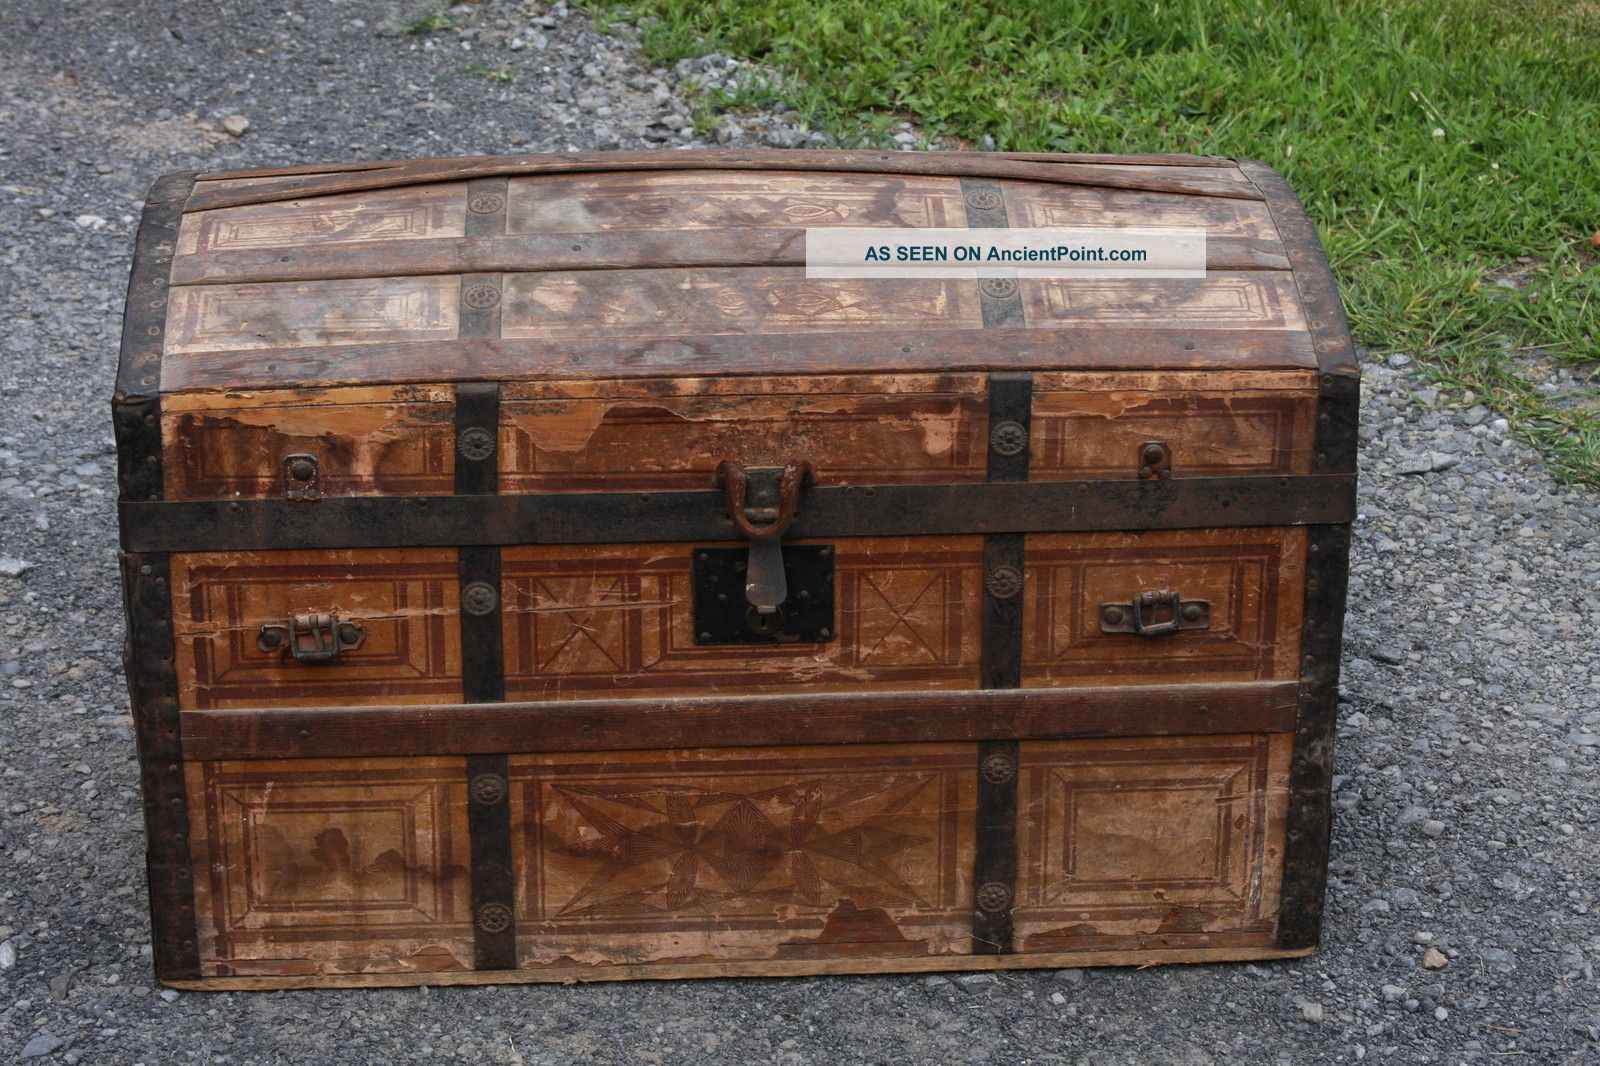 1870s Victorian Dome Top Trunk With Tray - Wood Slats - Estate Item From Attic 1800-1899 photo